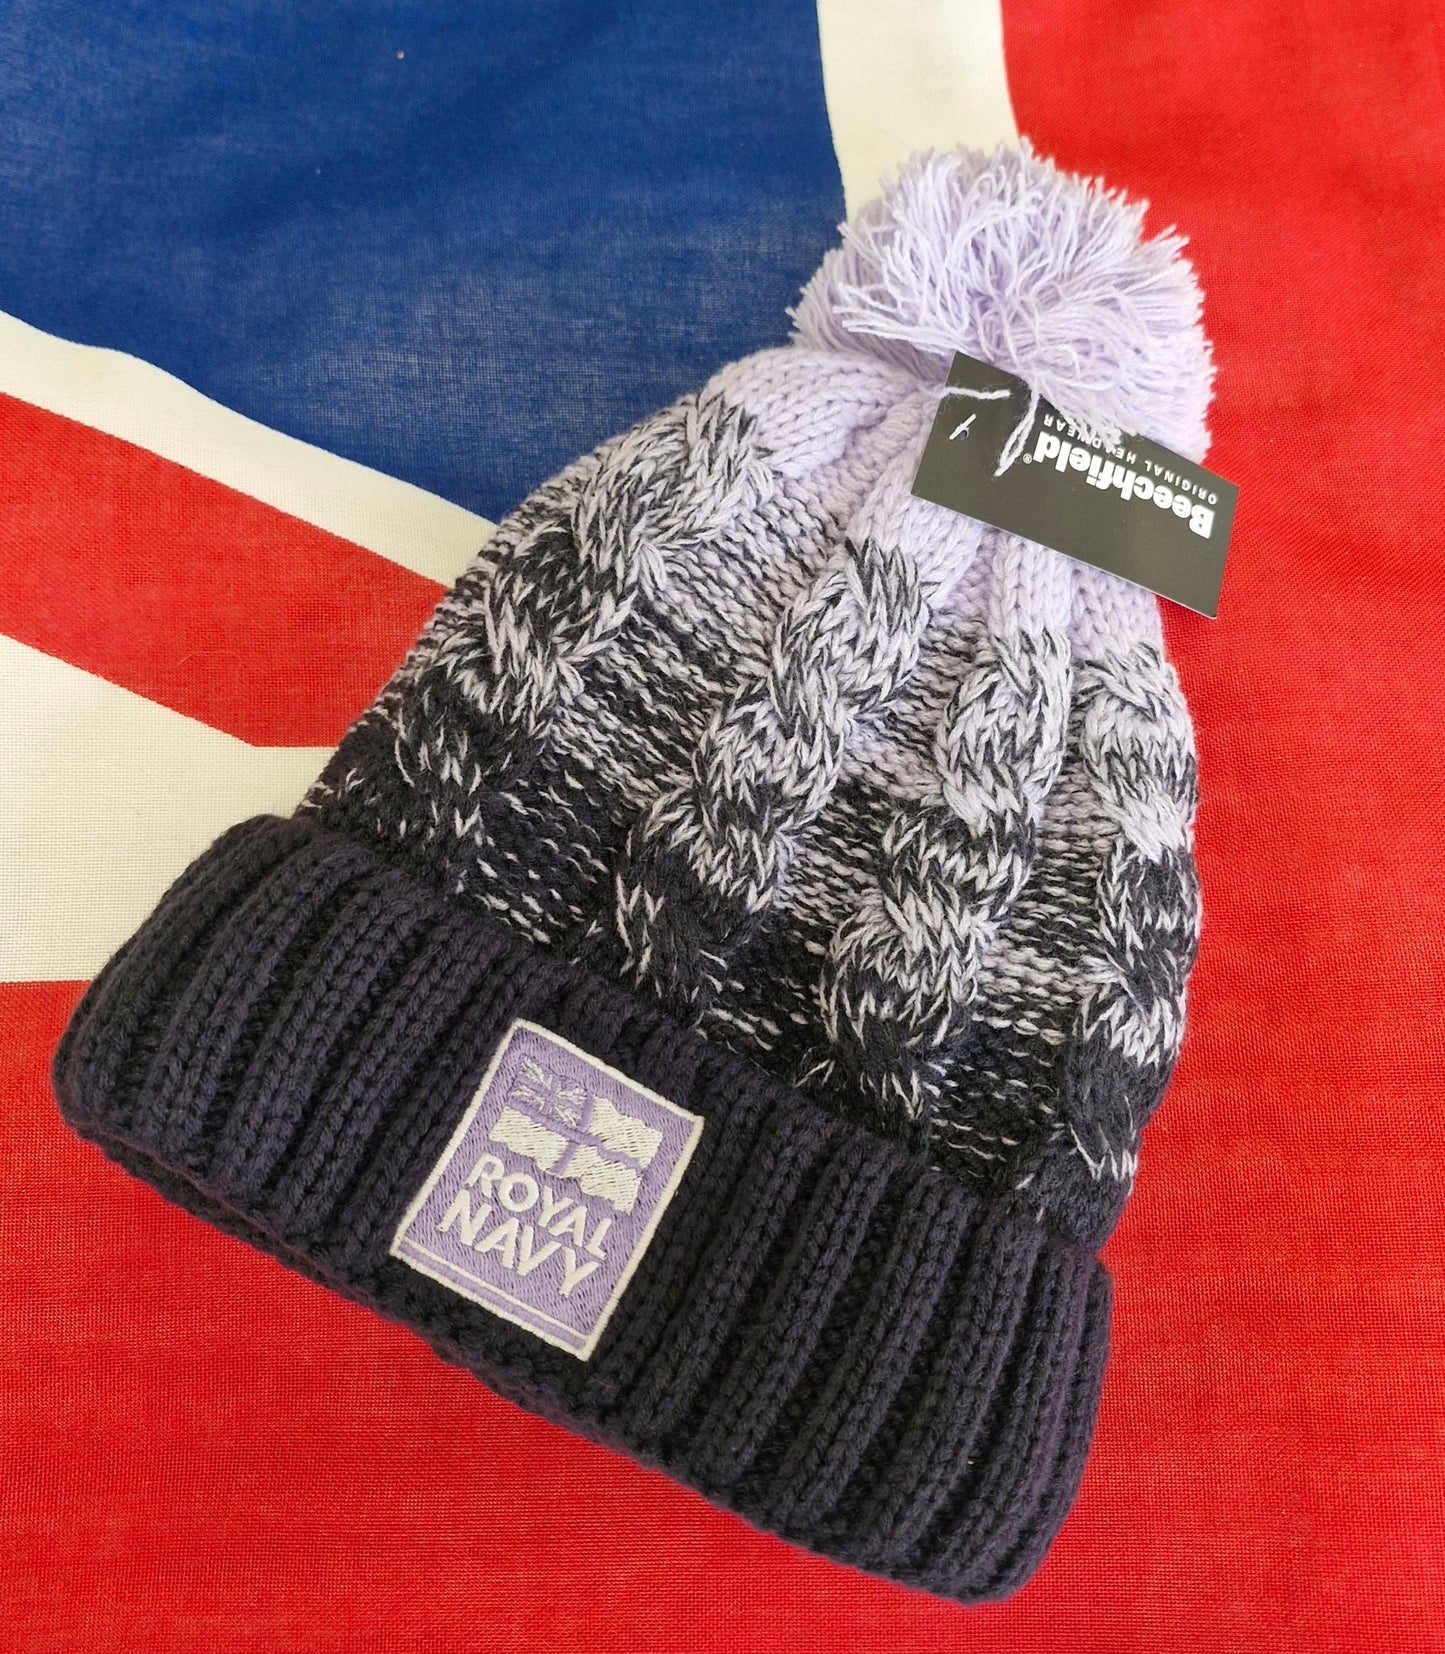 Royal Navy knitted bobble beanie